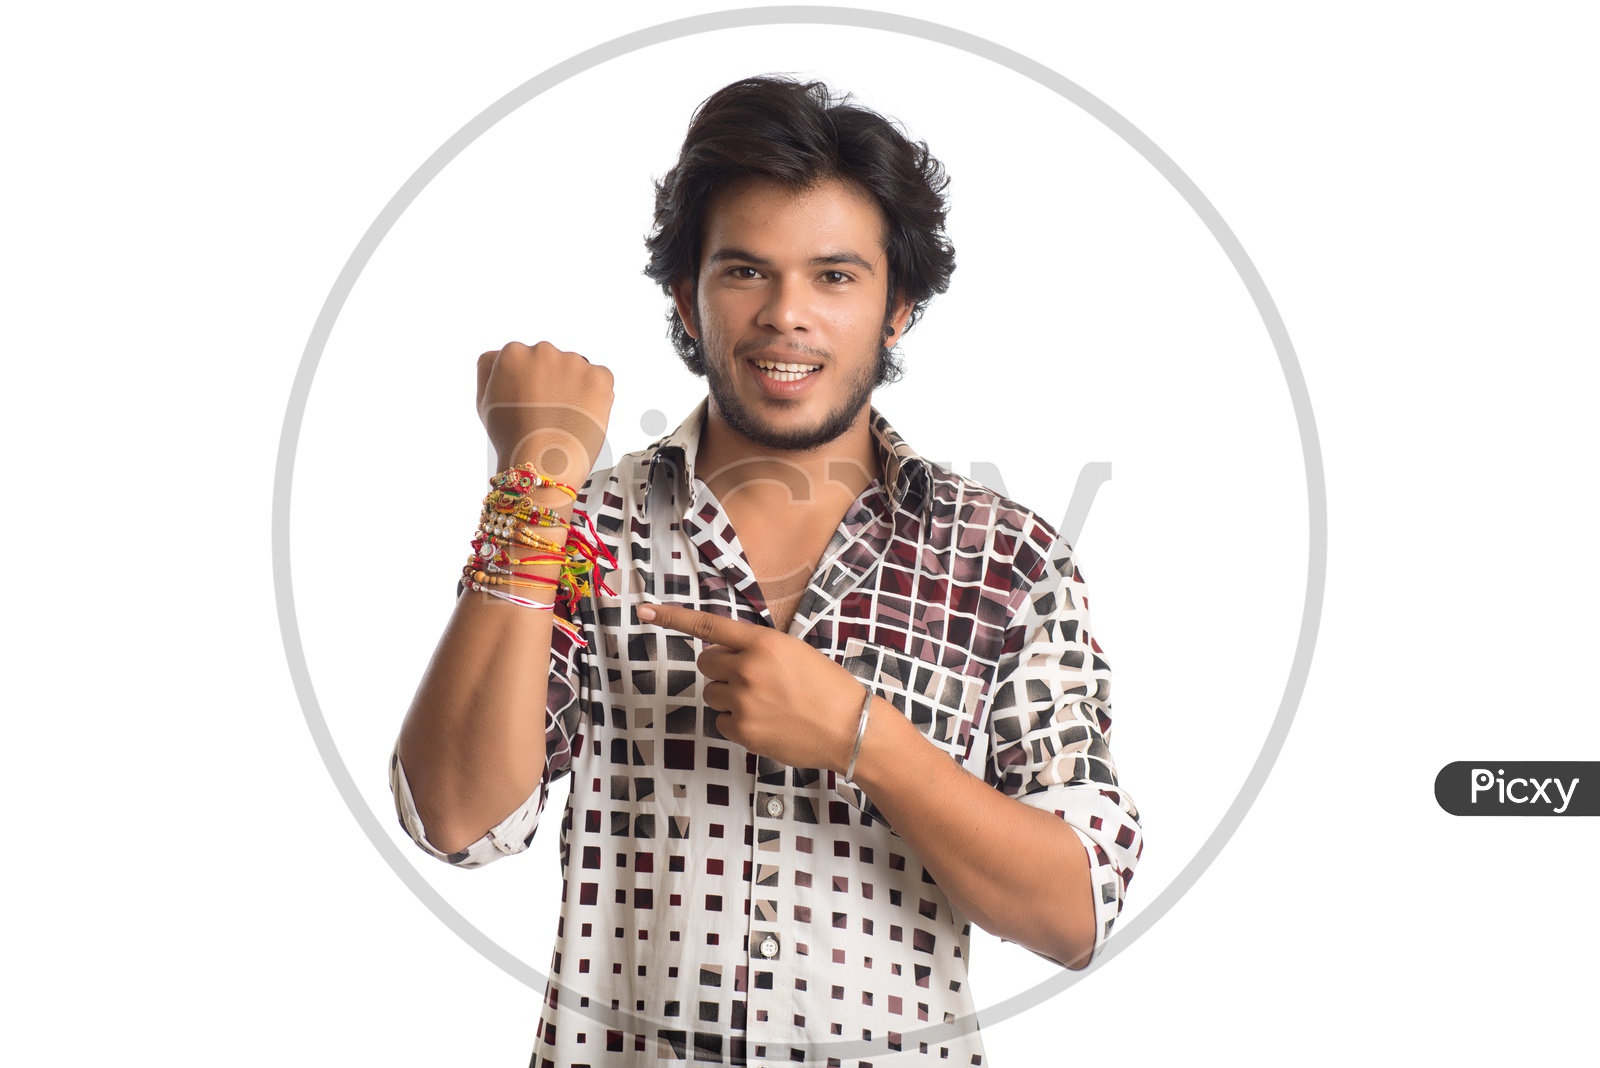 Indian Young Man Showing Rakhi Tied Hand And Smiling On an  Isolated White Background